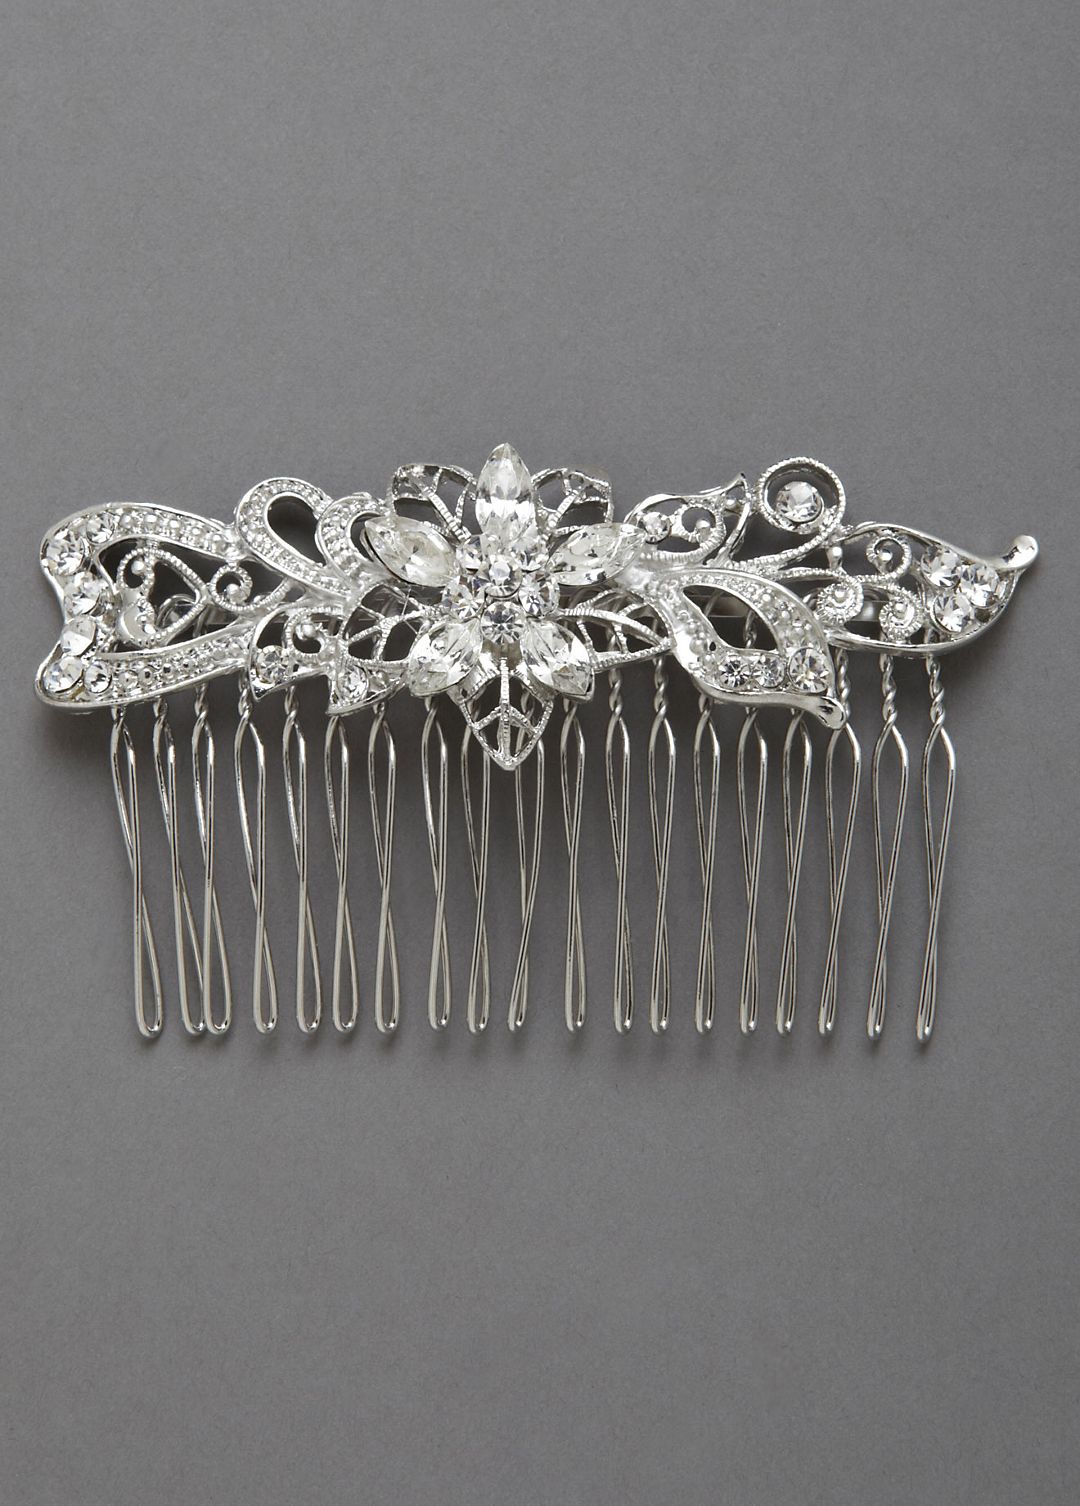 Floral Silver Crystal Comb Image